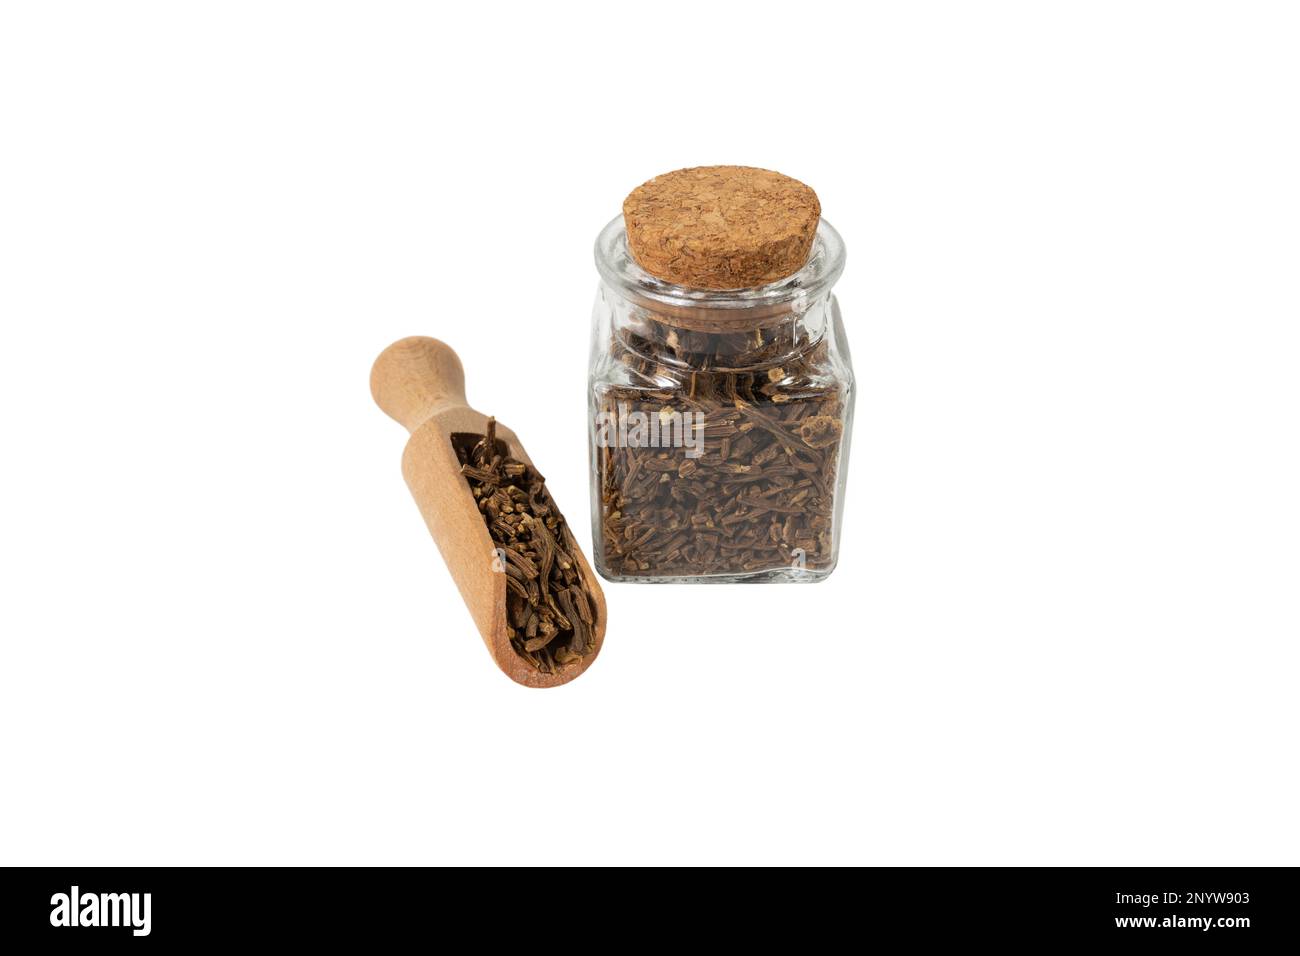 Valerian herb root in wooden scoop and glass jar isolated on white background. Valeriana officinalis. used in herbal medicine as a tranquillizer and t Stock Photo